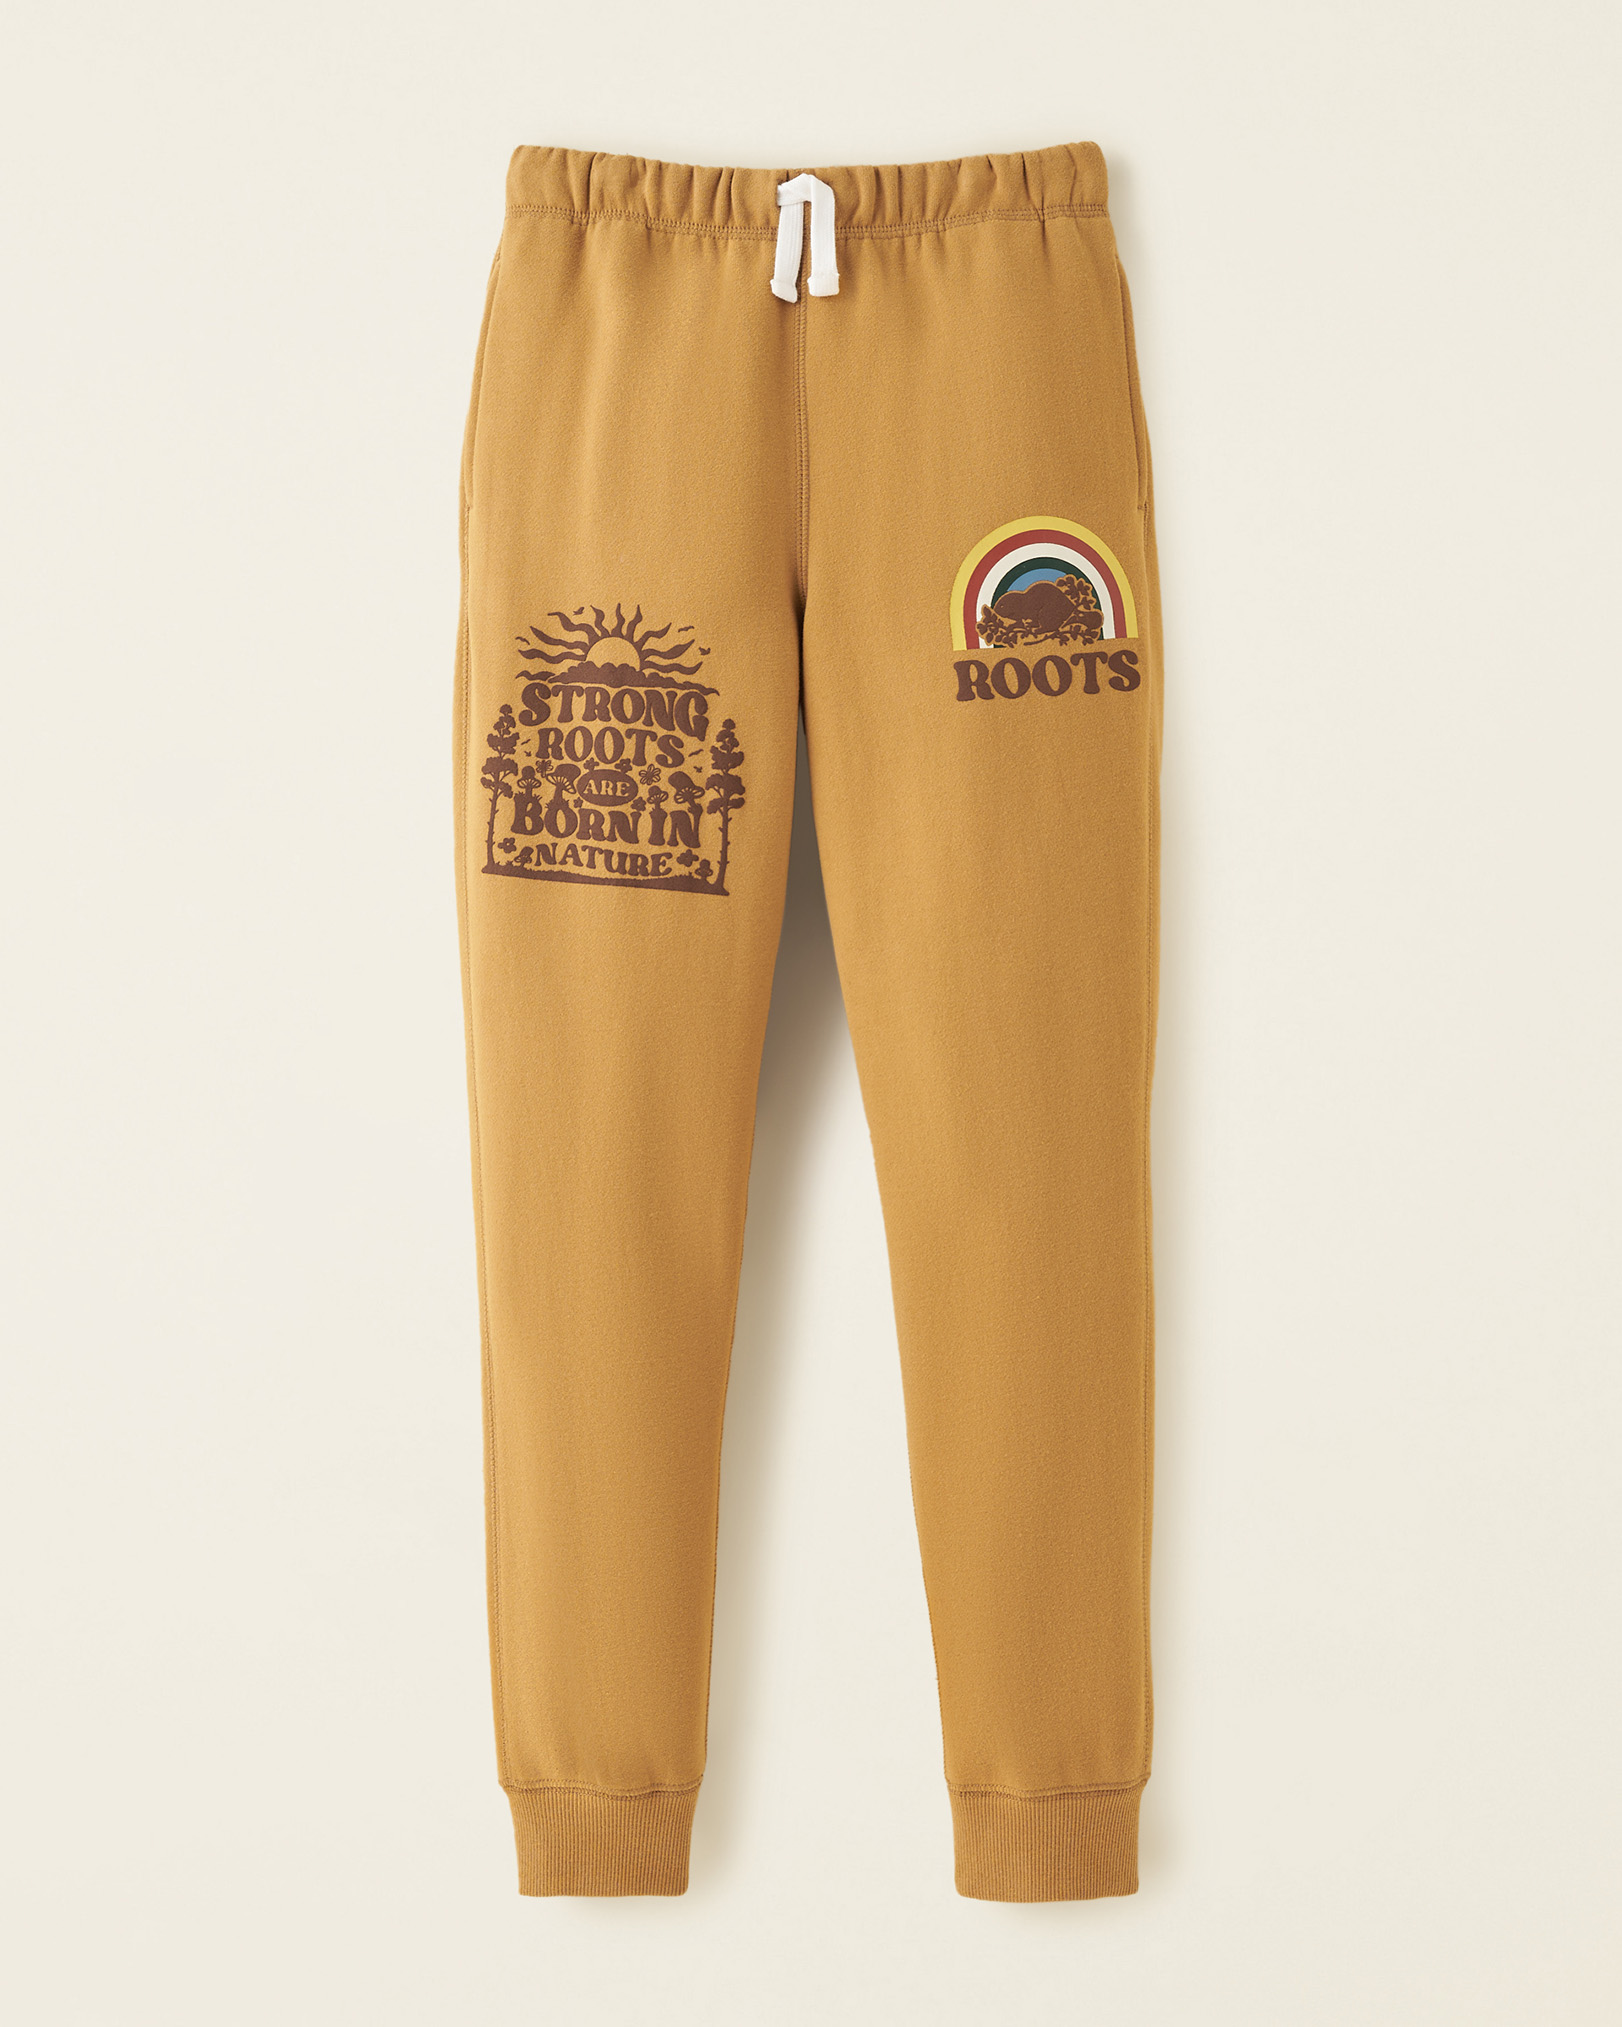 Roots Kids Nature Sweatpant in Sienna Brown